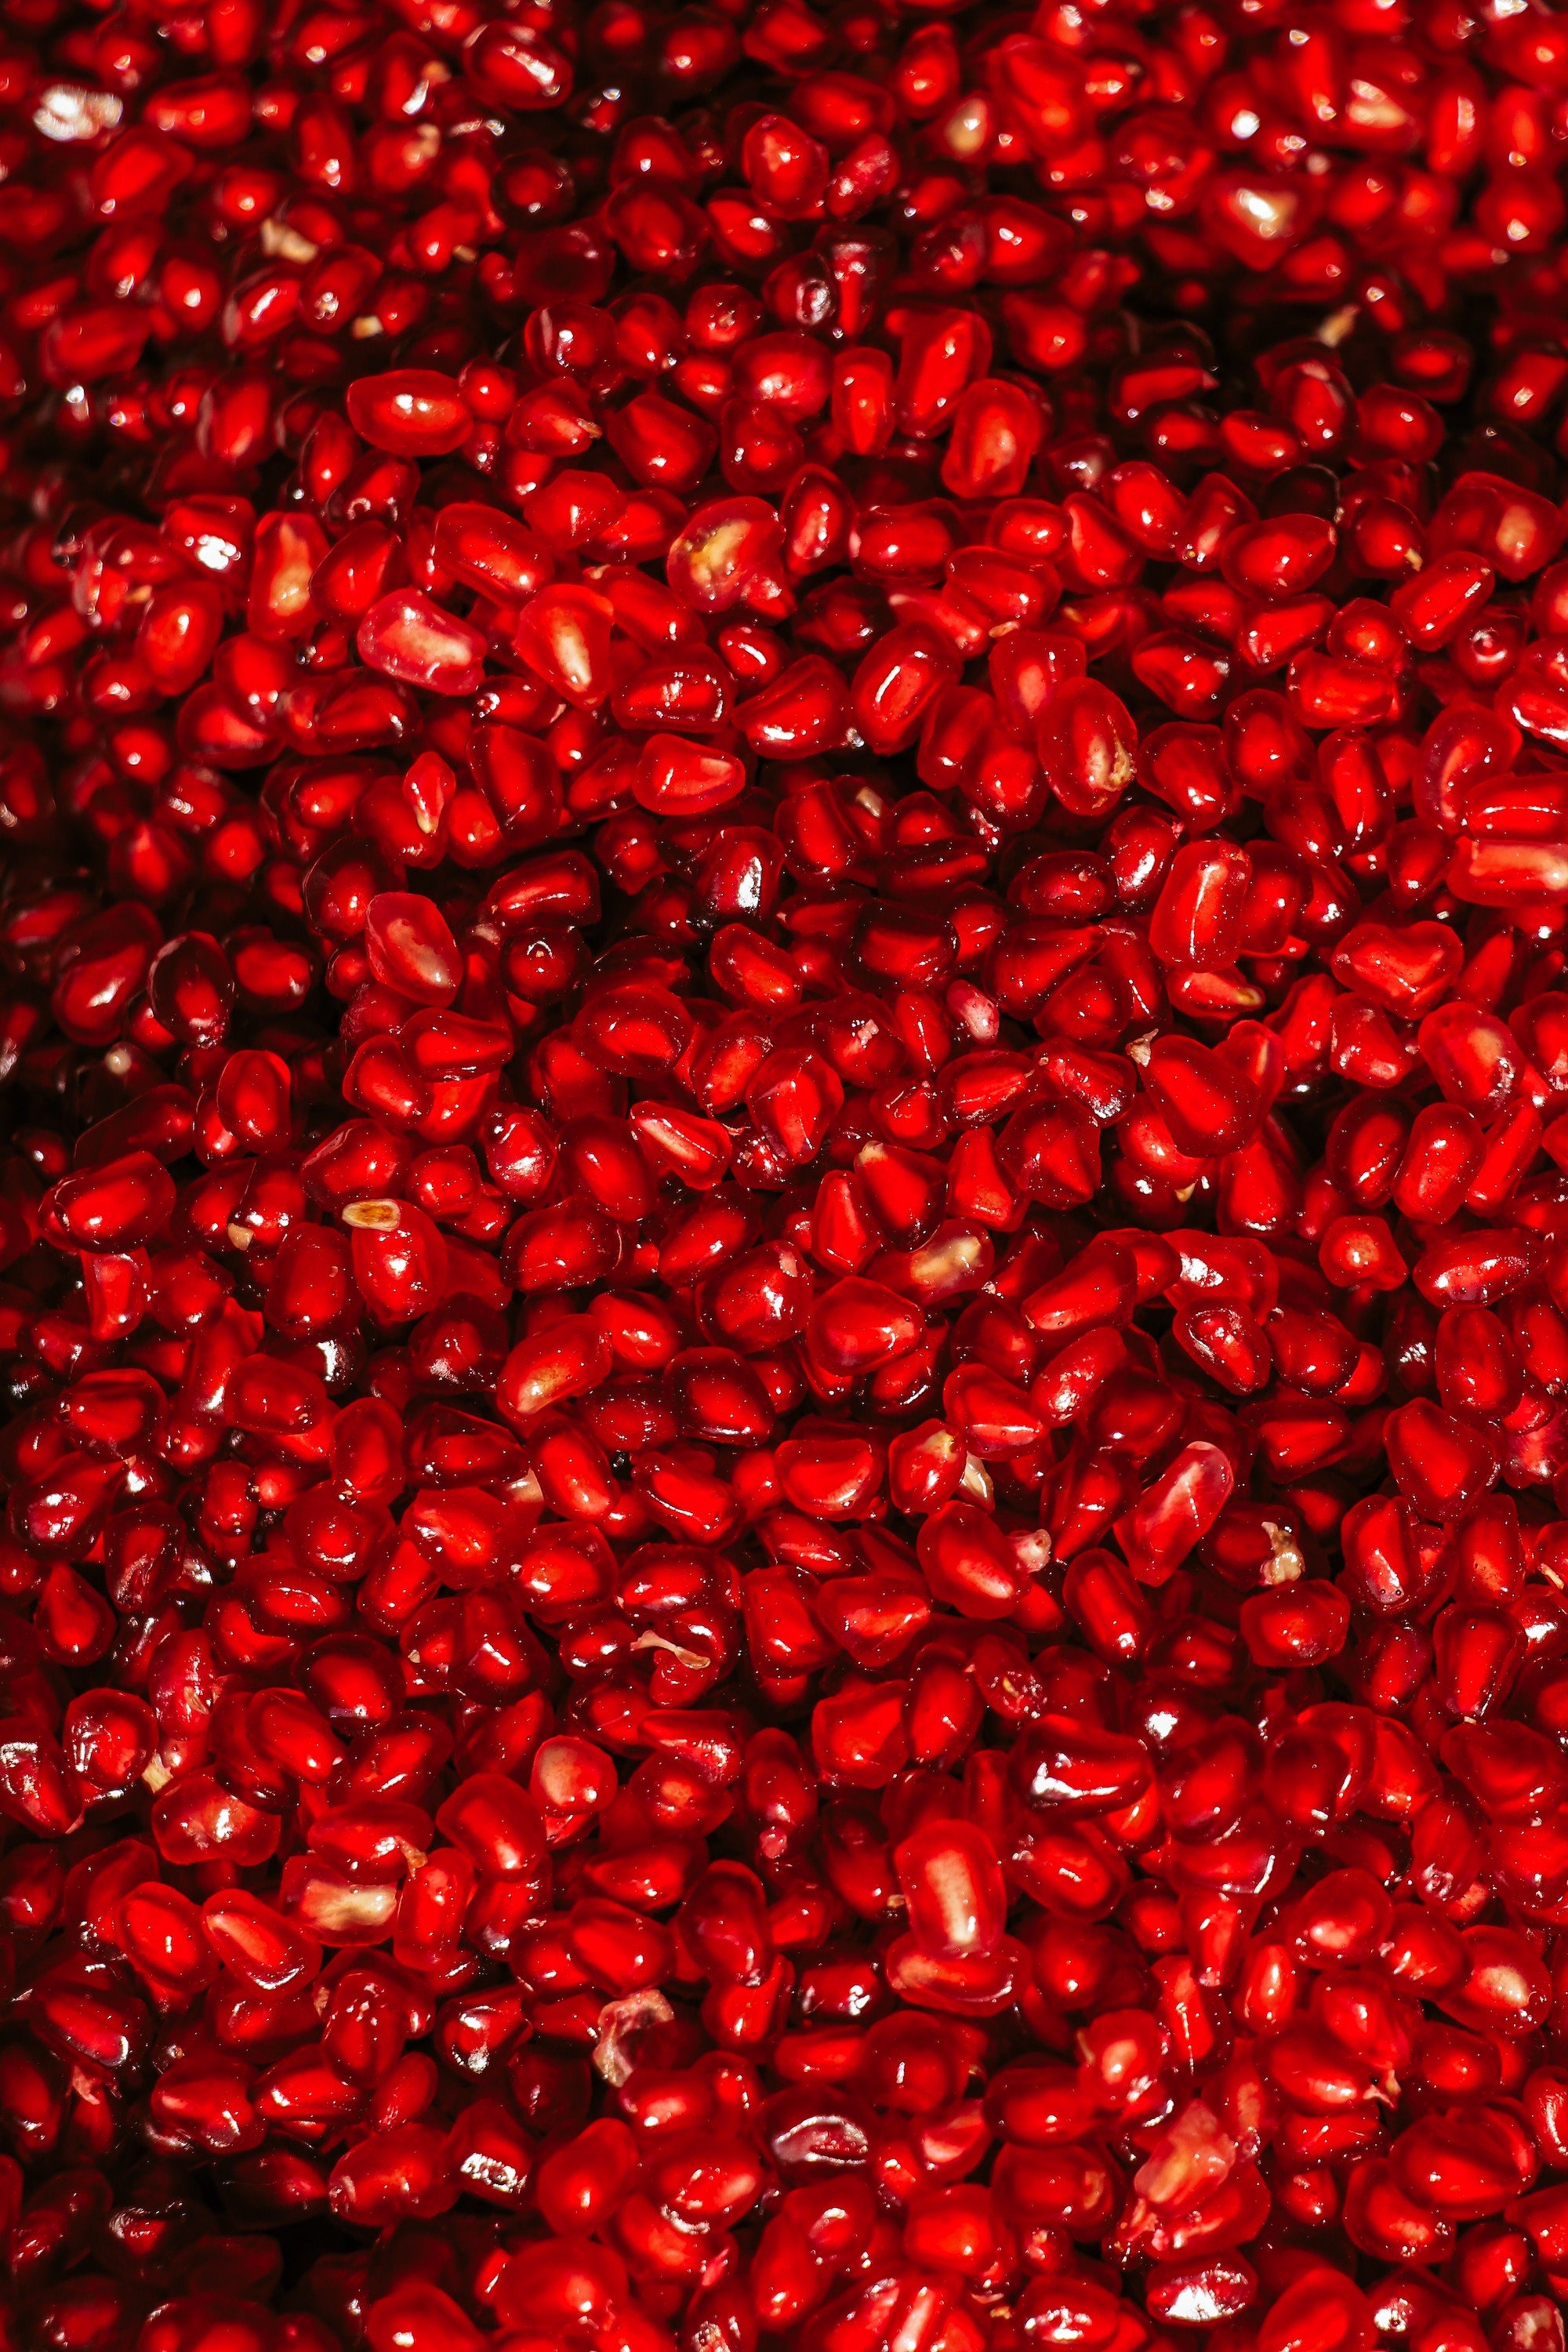 Description: A close-up photograph of a ripe pomegranate, showcasing its vibrant red color and textured outer skin. The pomegranate is split open to reveal its juicy, ruby-red seeds inside.